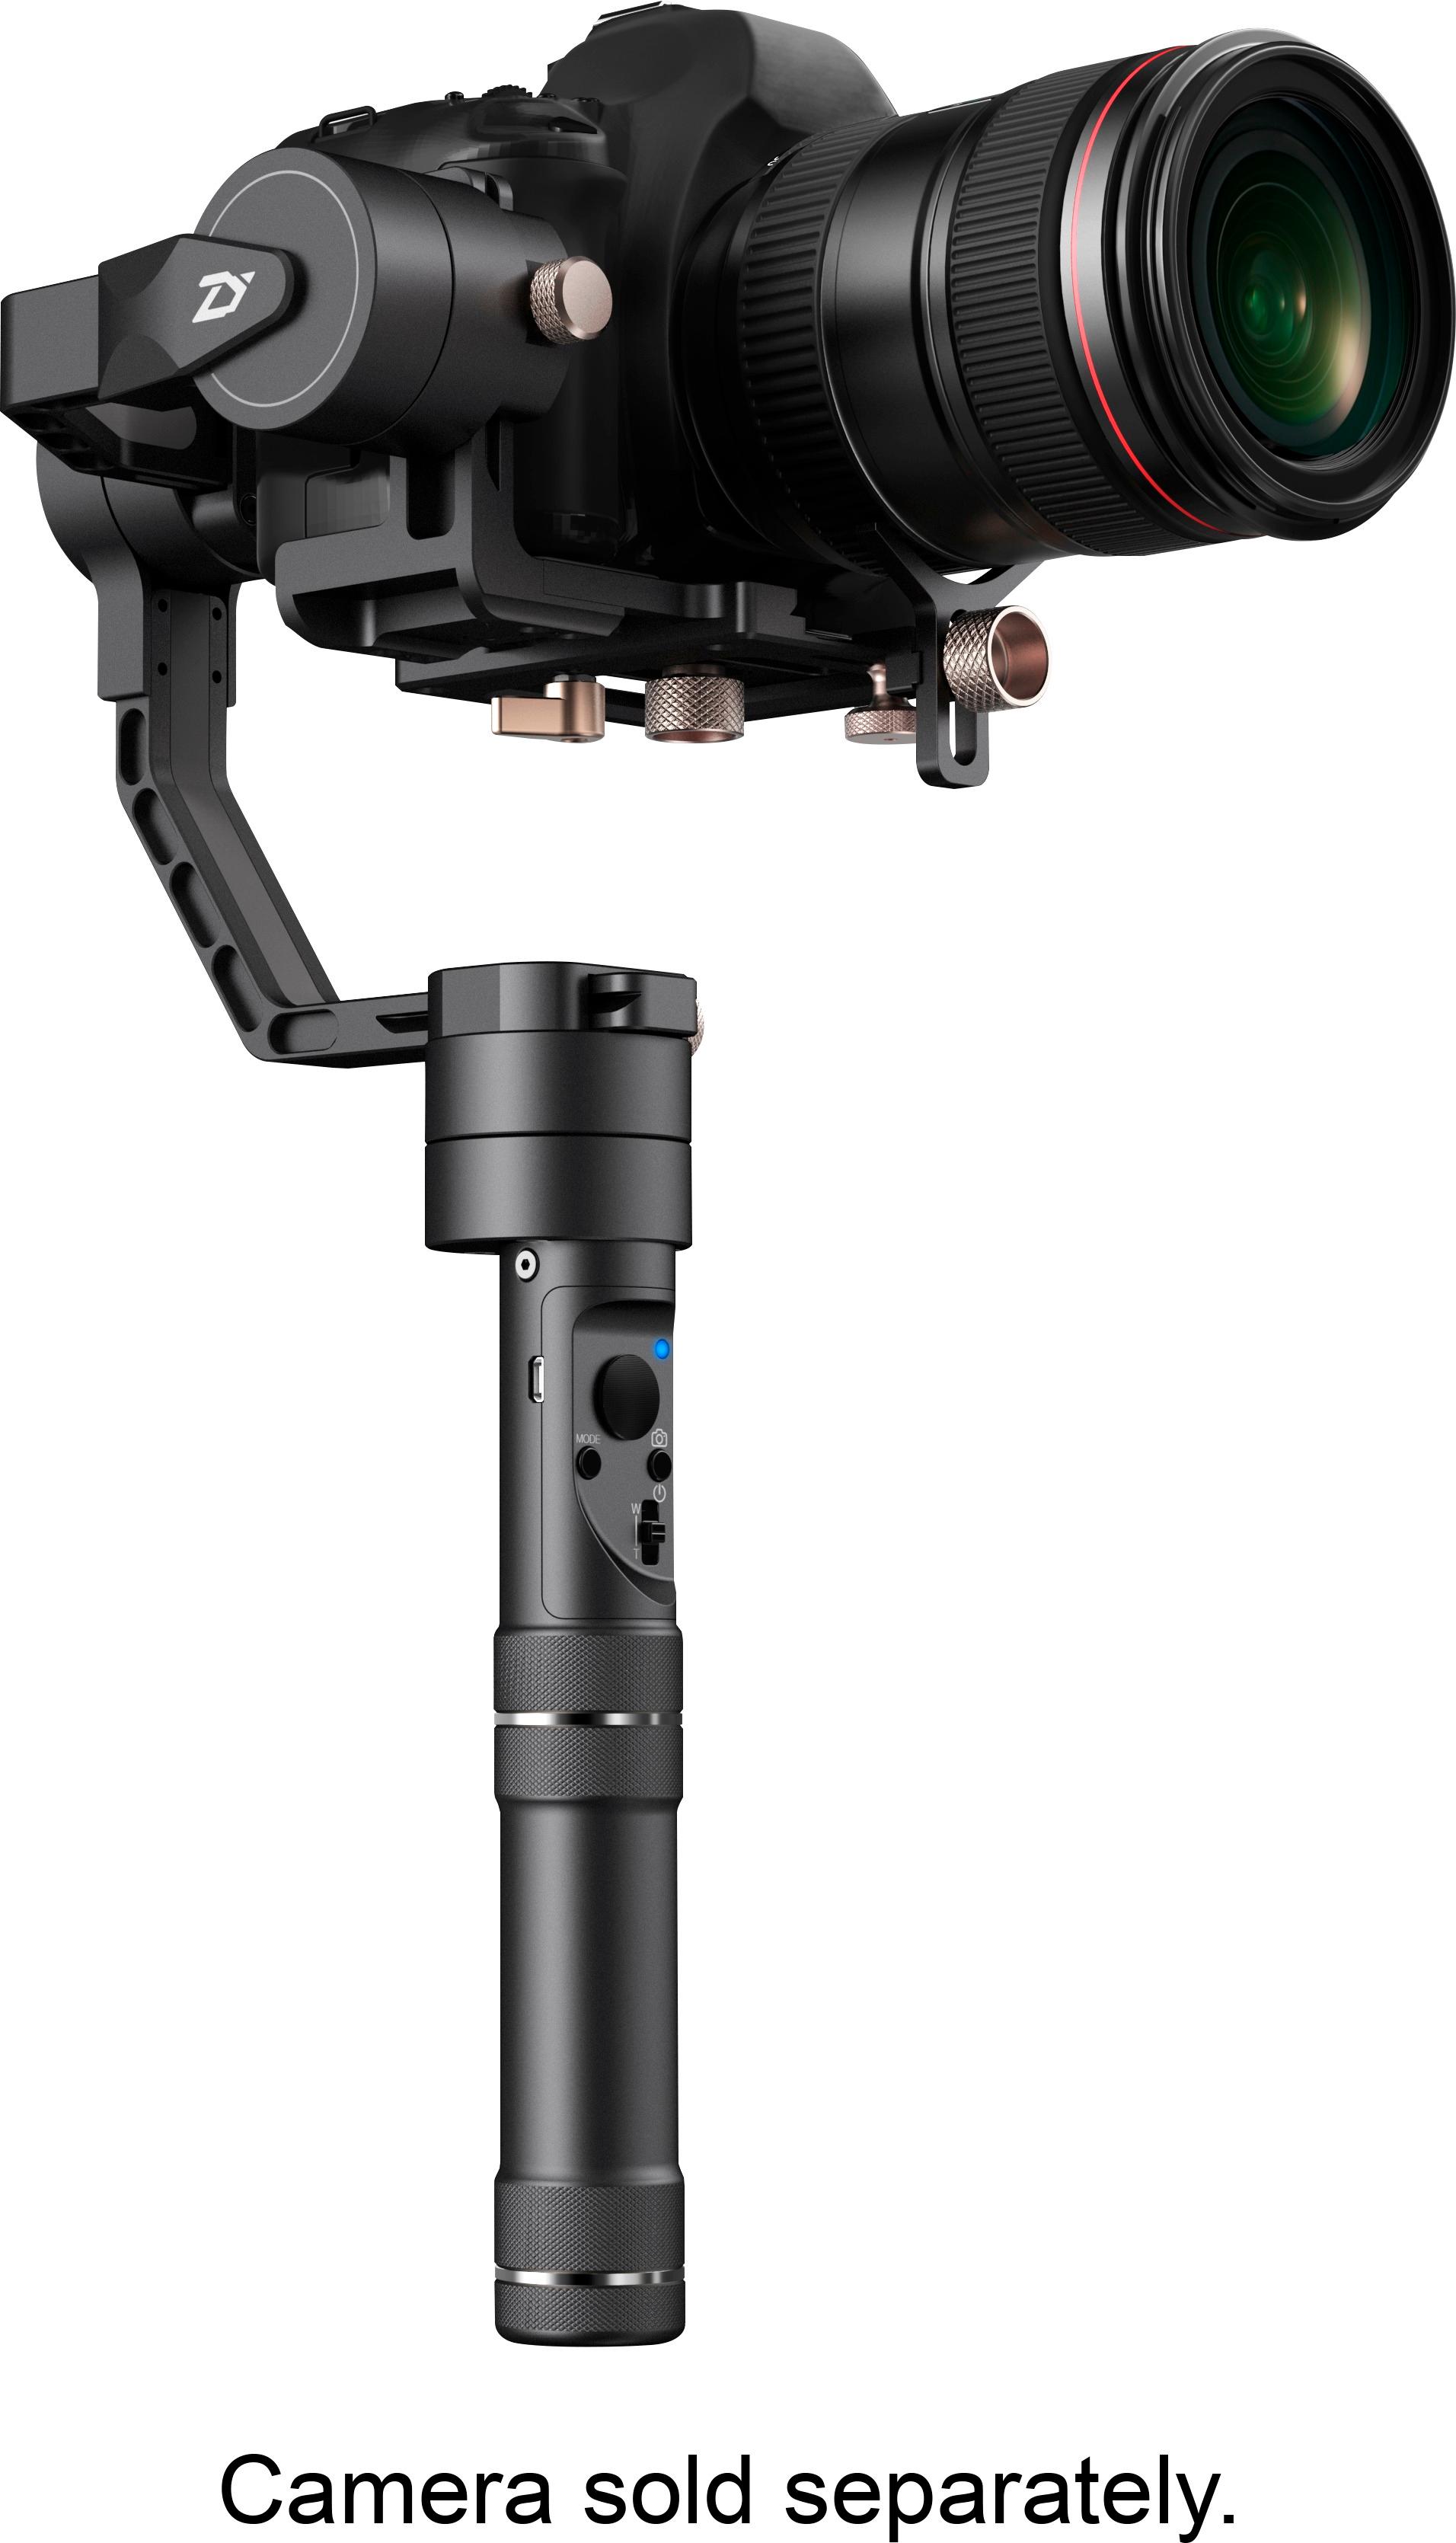 Angle View: Zhiyun - Crane Plus 3-Axis Handheld Gimbal Stabilizer for DSLR Cameras